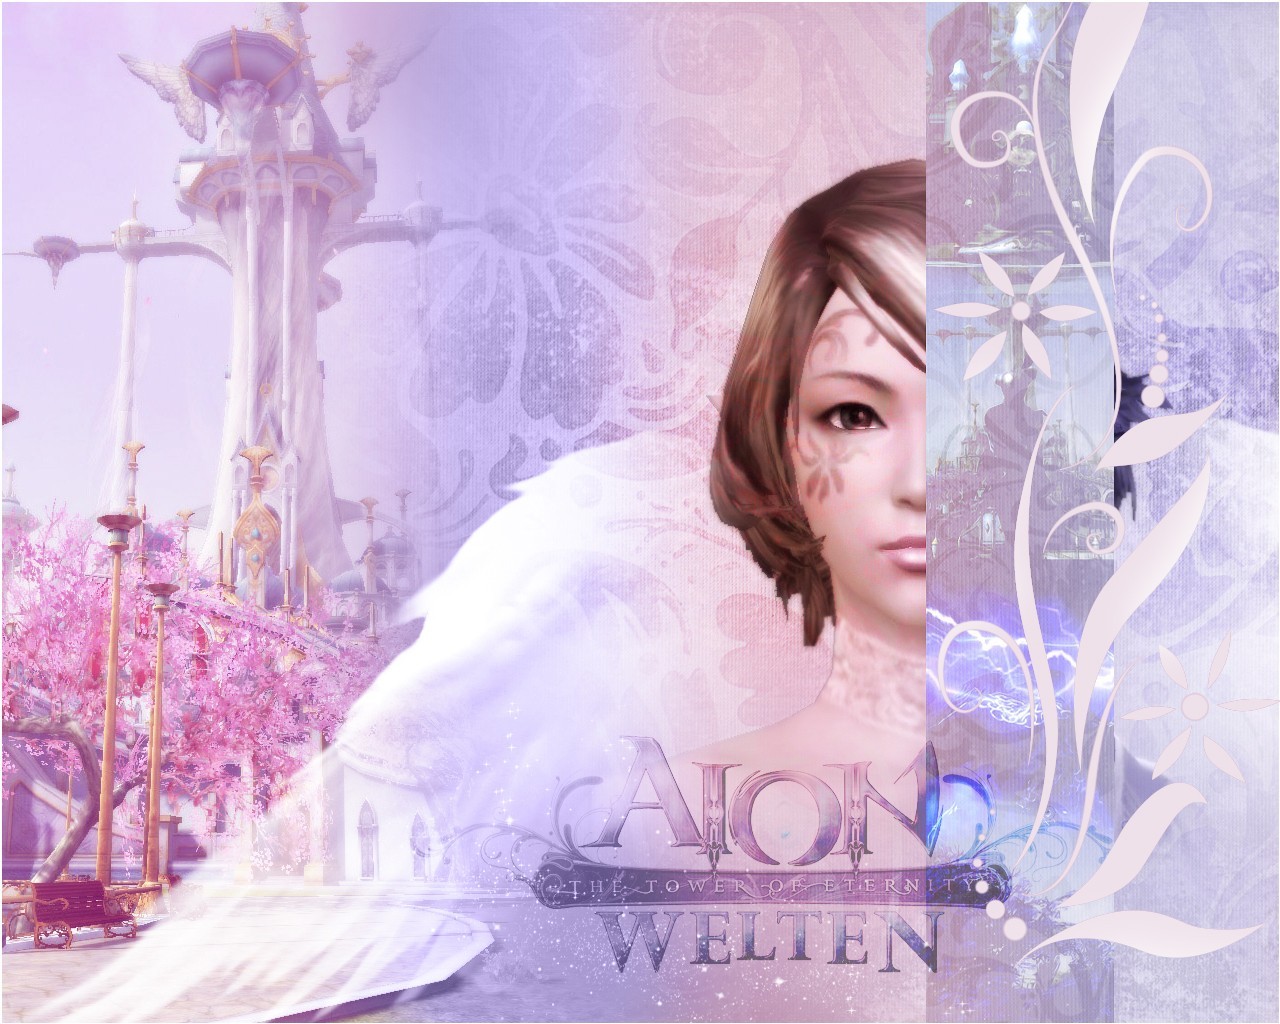 video game, aion: tower of eternity